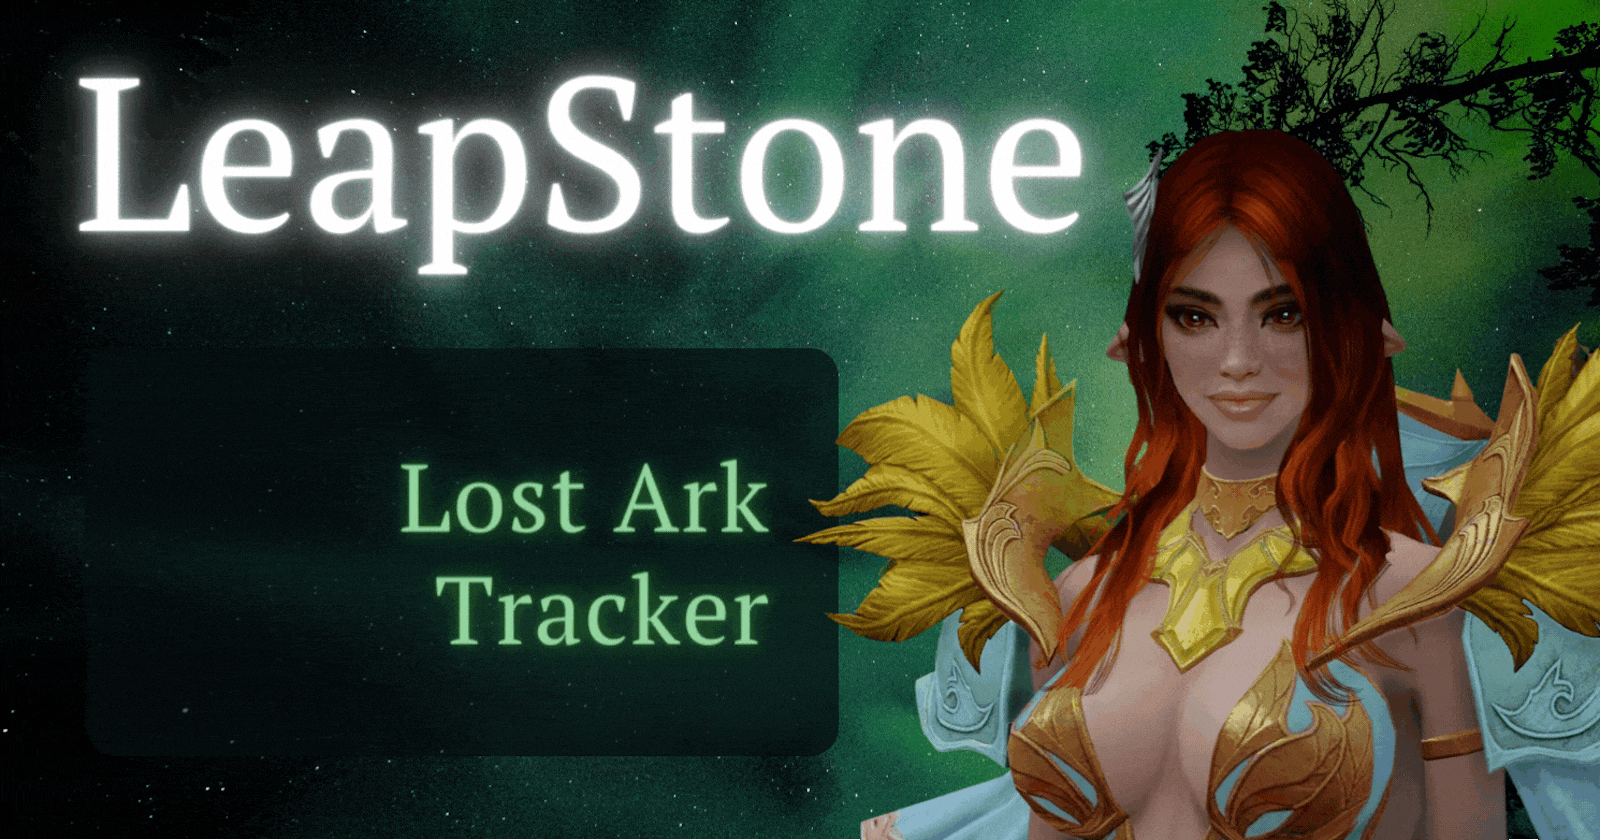 Introducing: LeapStone - A Lost Ark Quest Tracker made in Svelte Kit